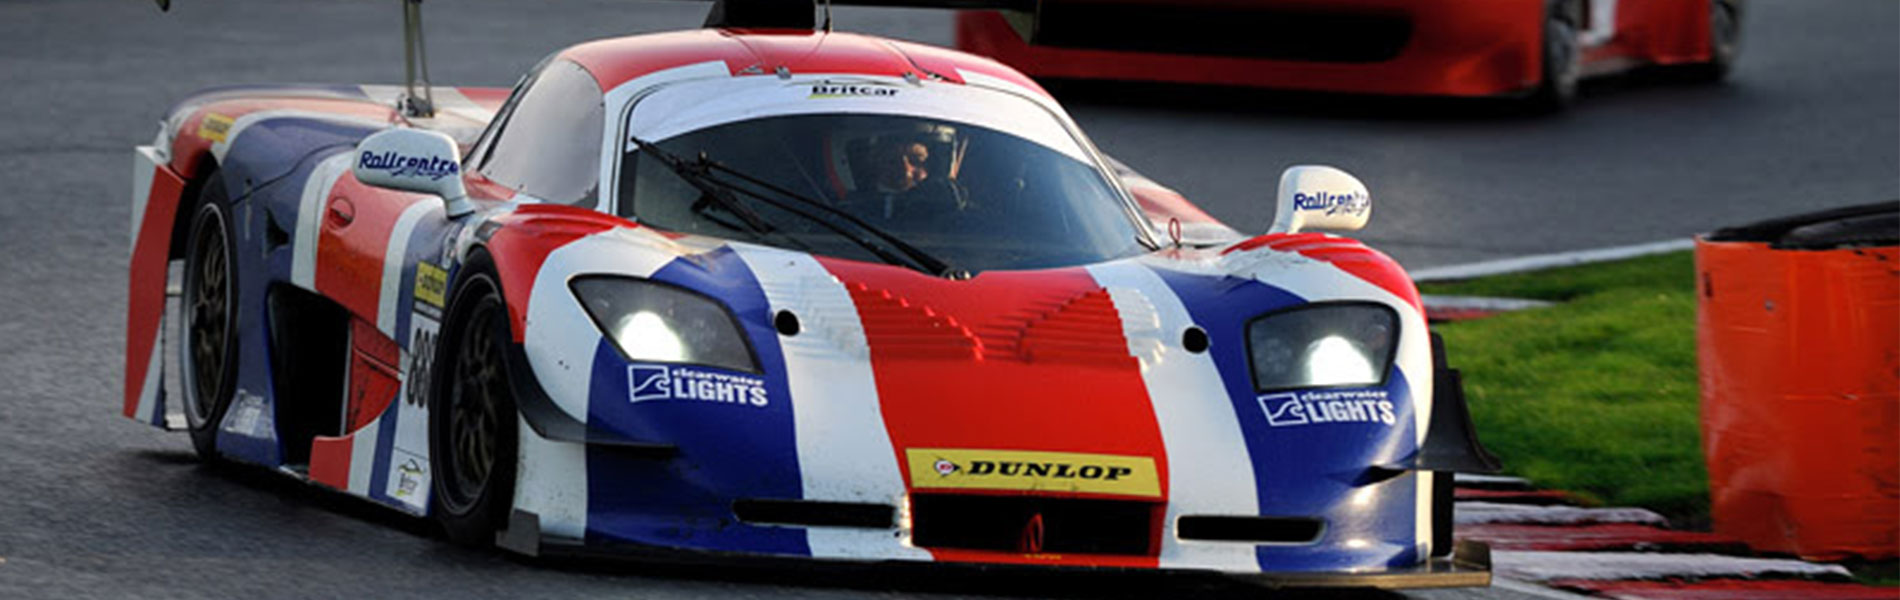 neary-nails-it-in-martins-mothballed-mosler-motorsportdays-test-days-2